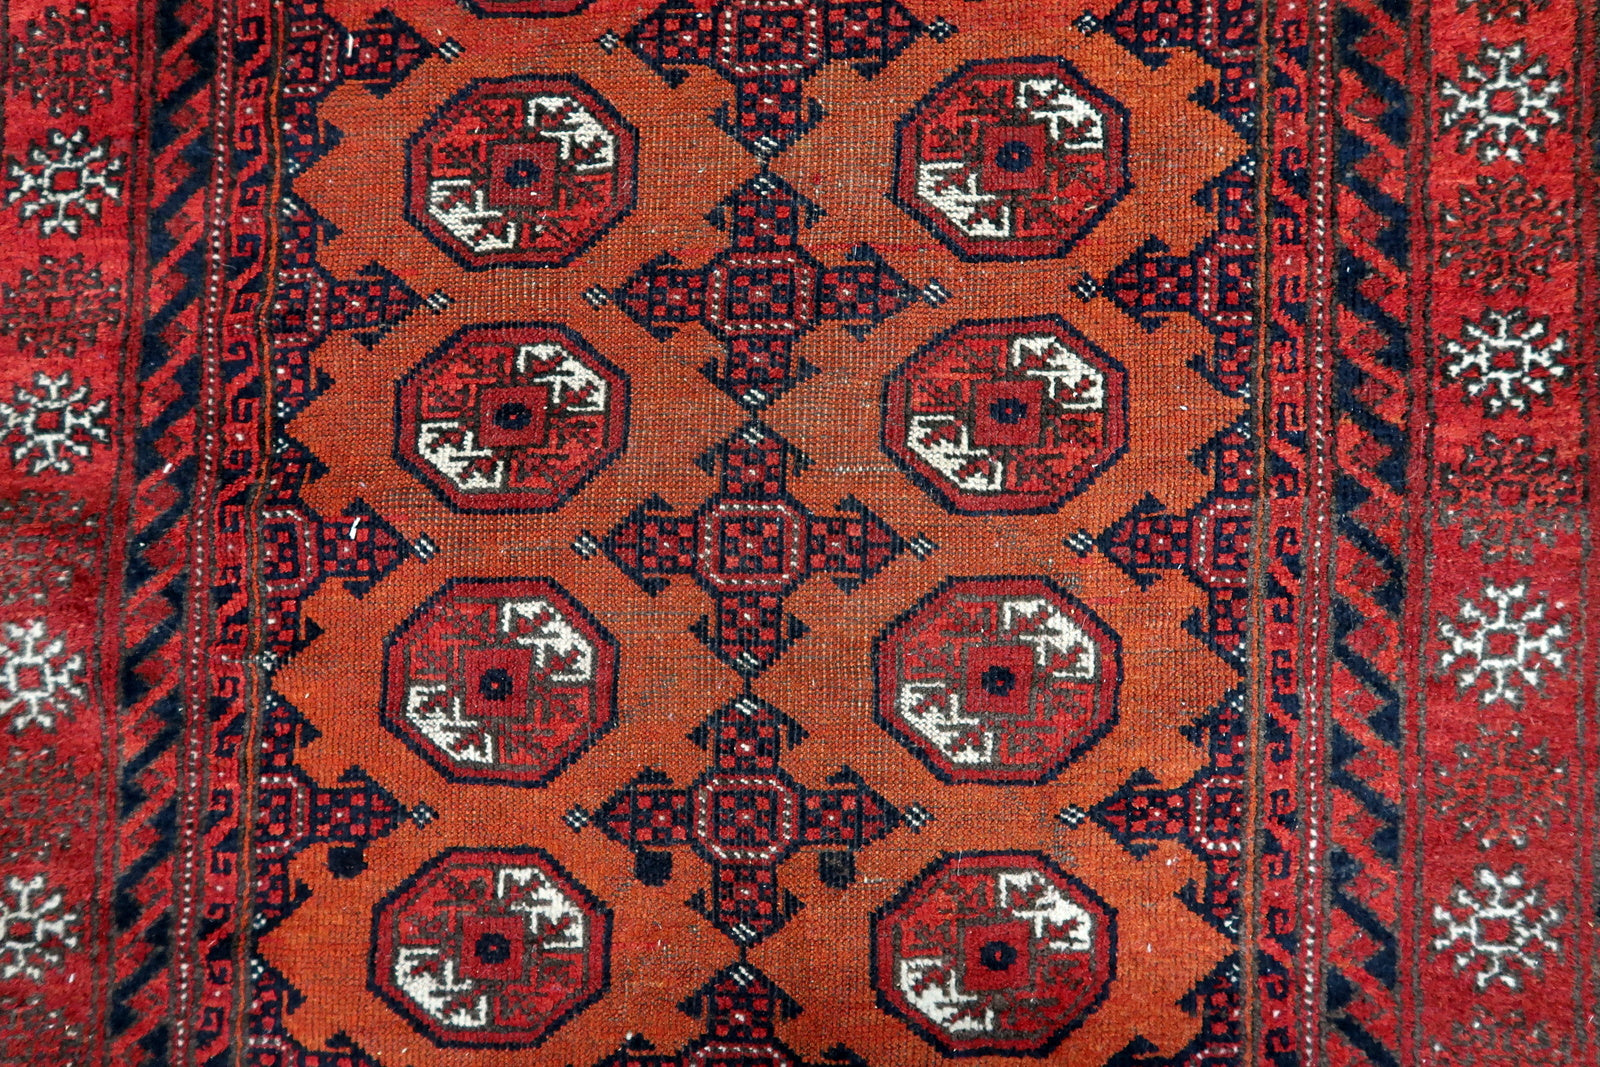 Close-up of wool material on Handmade Antique Afghan Baluch Rug - Detailed view showcasing the wool material known for its durability and softness.